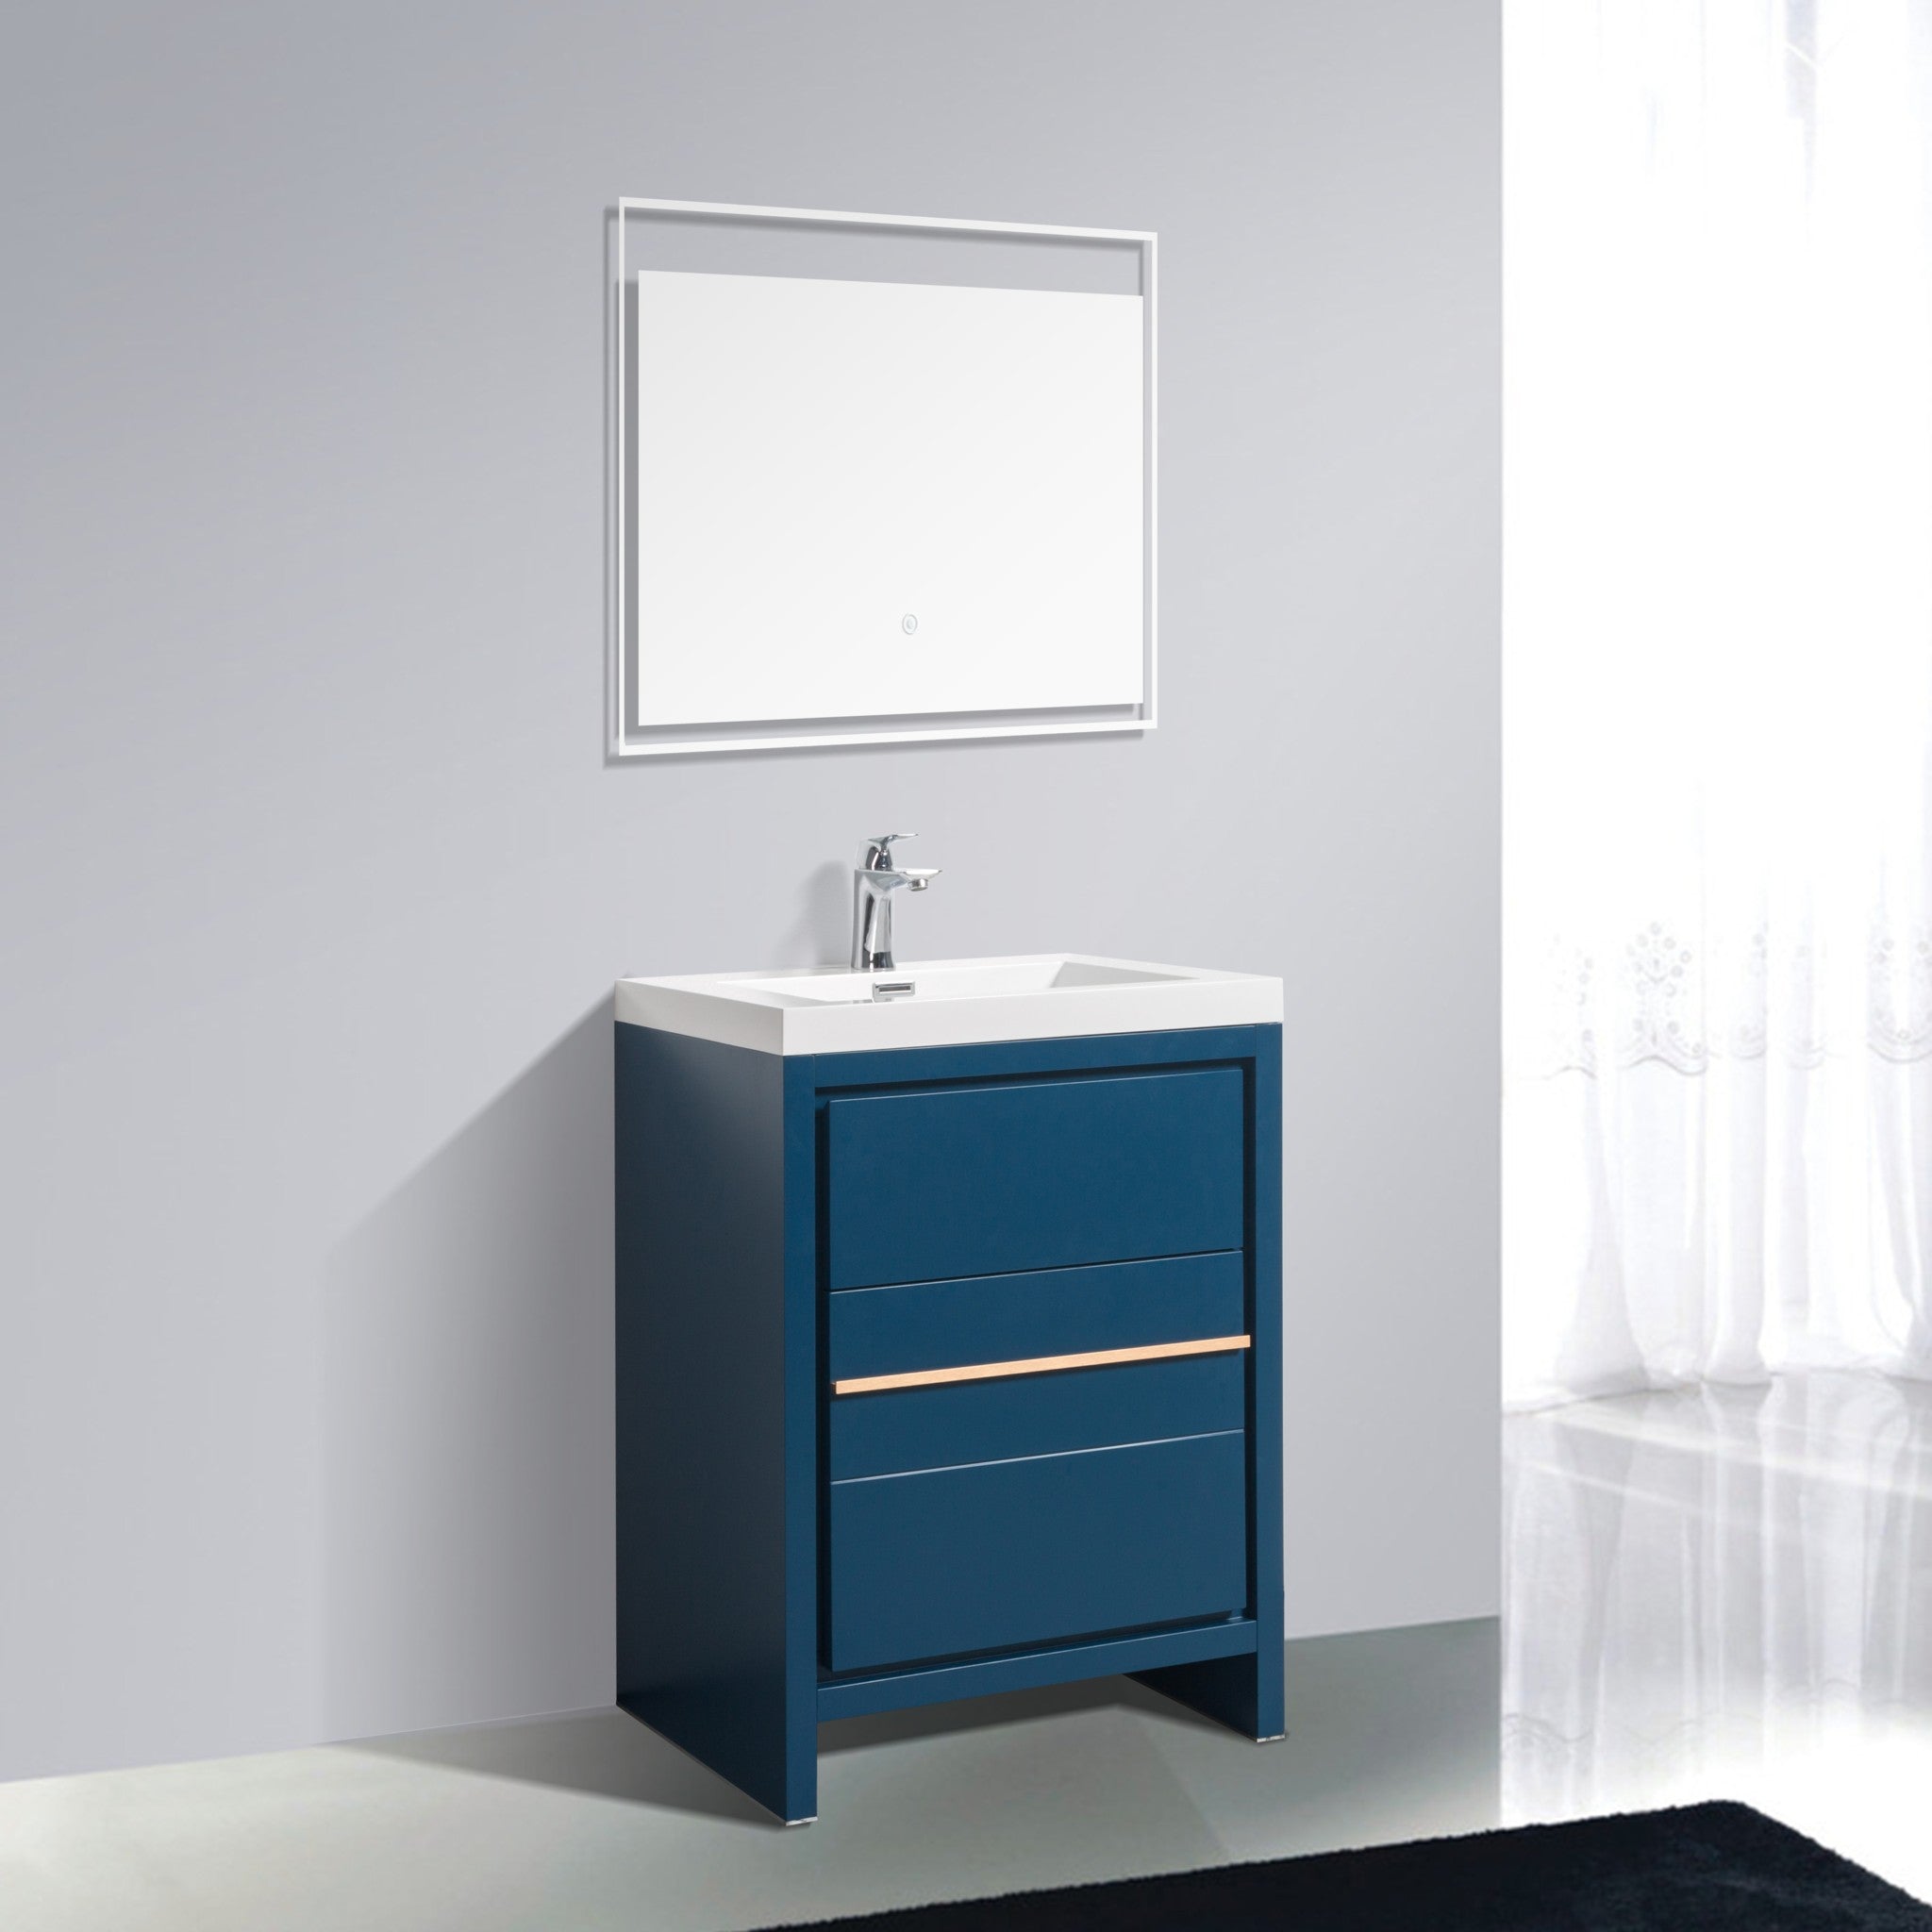 Granada 23.5 Matte Blue With Brush Rose Gold Handle Cabinet, Square Cultured Marble Sink, Free Standing Modern Vanity Set